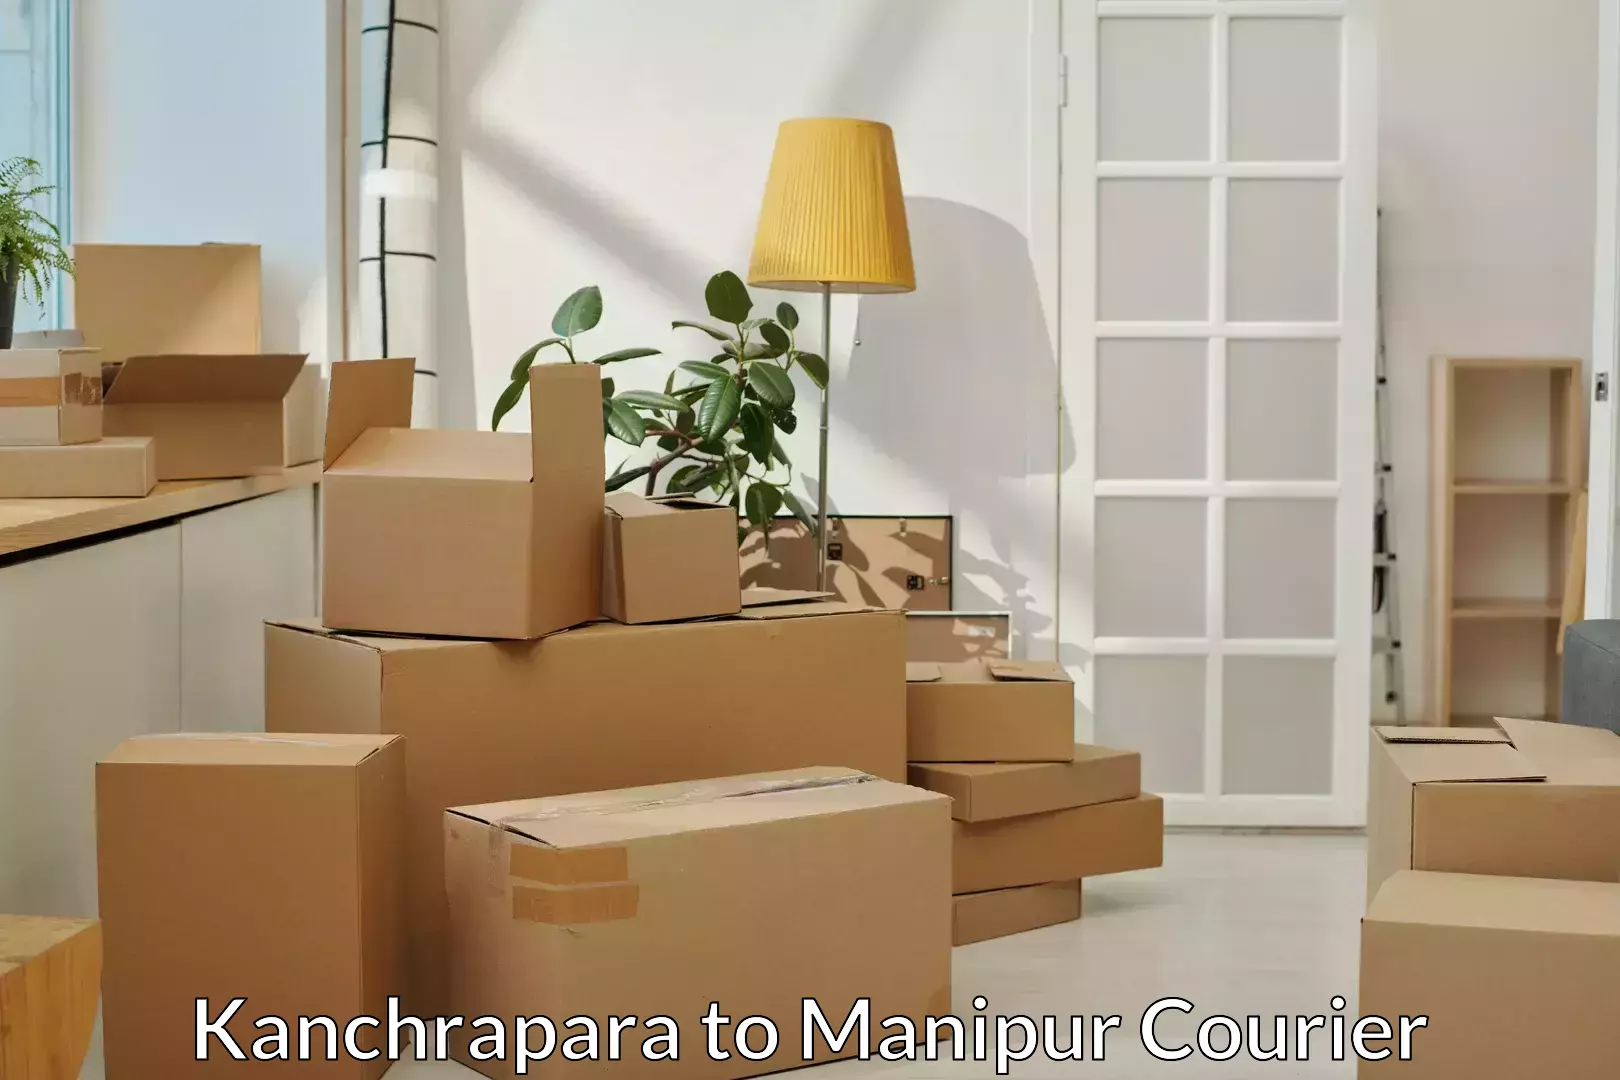 Budget-friendly moving services in Kanchrapara to Chandel